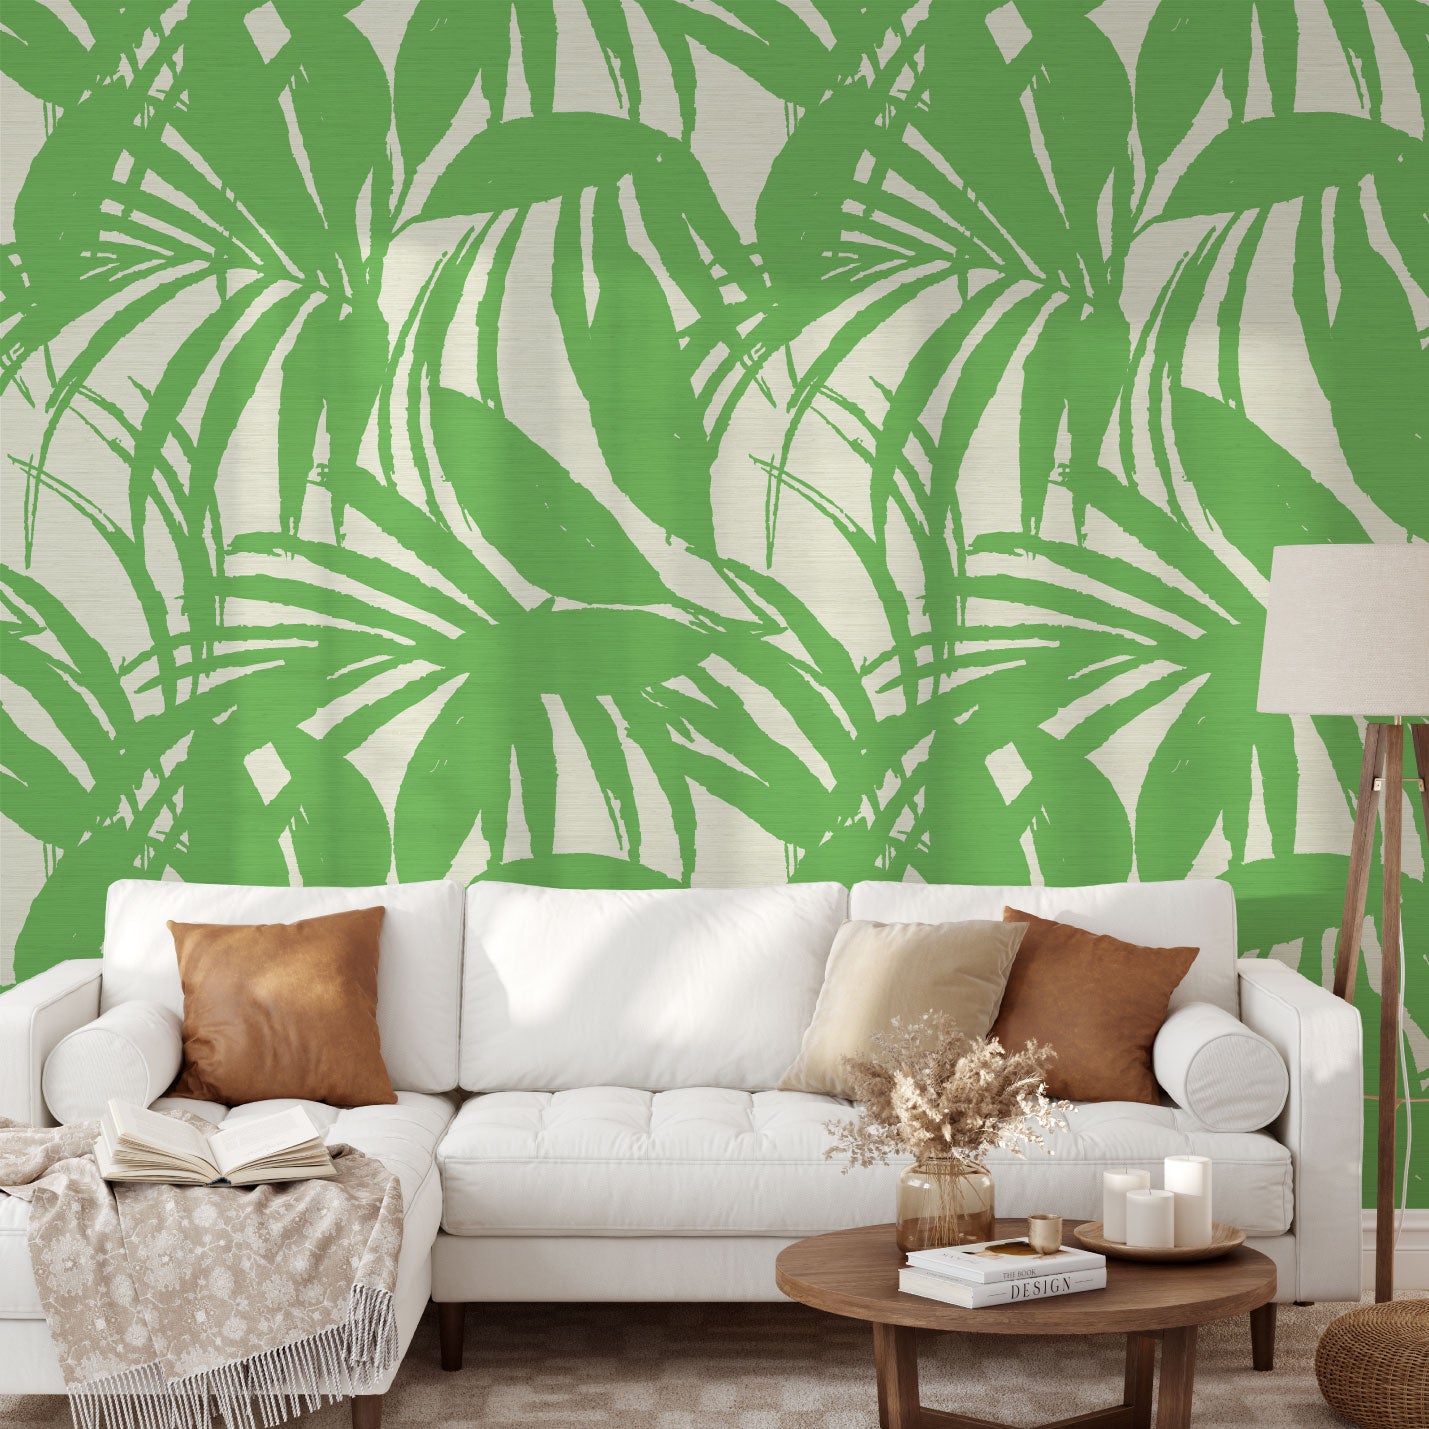 Load image into Gallery viewer, printed grasscloth wallpaper oversize tropical leaf Natural Textured Eco-Friendly Non-toxic High-quality  Sustainable practices Sustainability Interior Design Wall covering Bold retro chic custom jungle garden botanical Seaside Coastal Seashore Waterfront Vacation home styling Retreat Relaxed beach vibes Beach cottage Shoreline Oceanfront white kelly paradise green  living room
